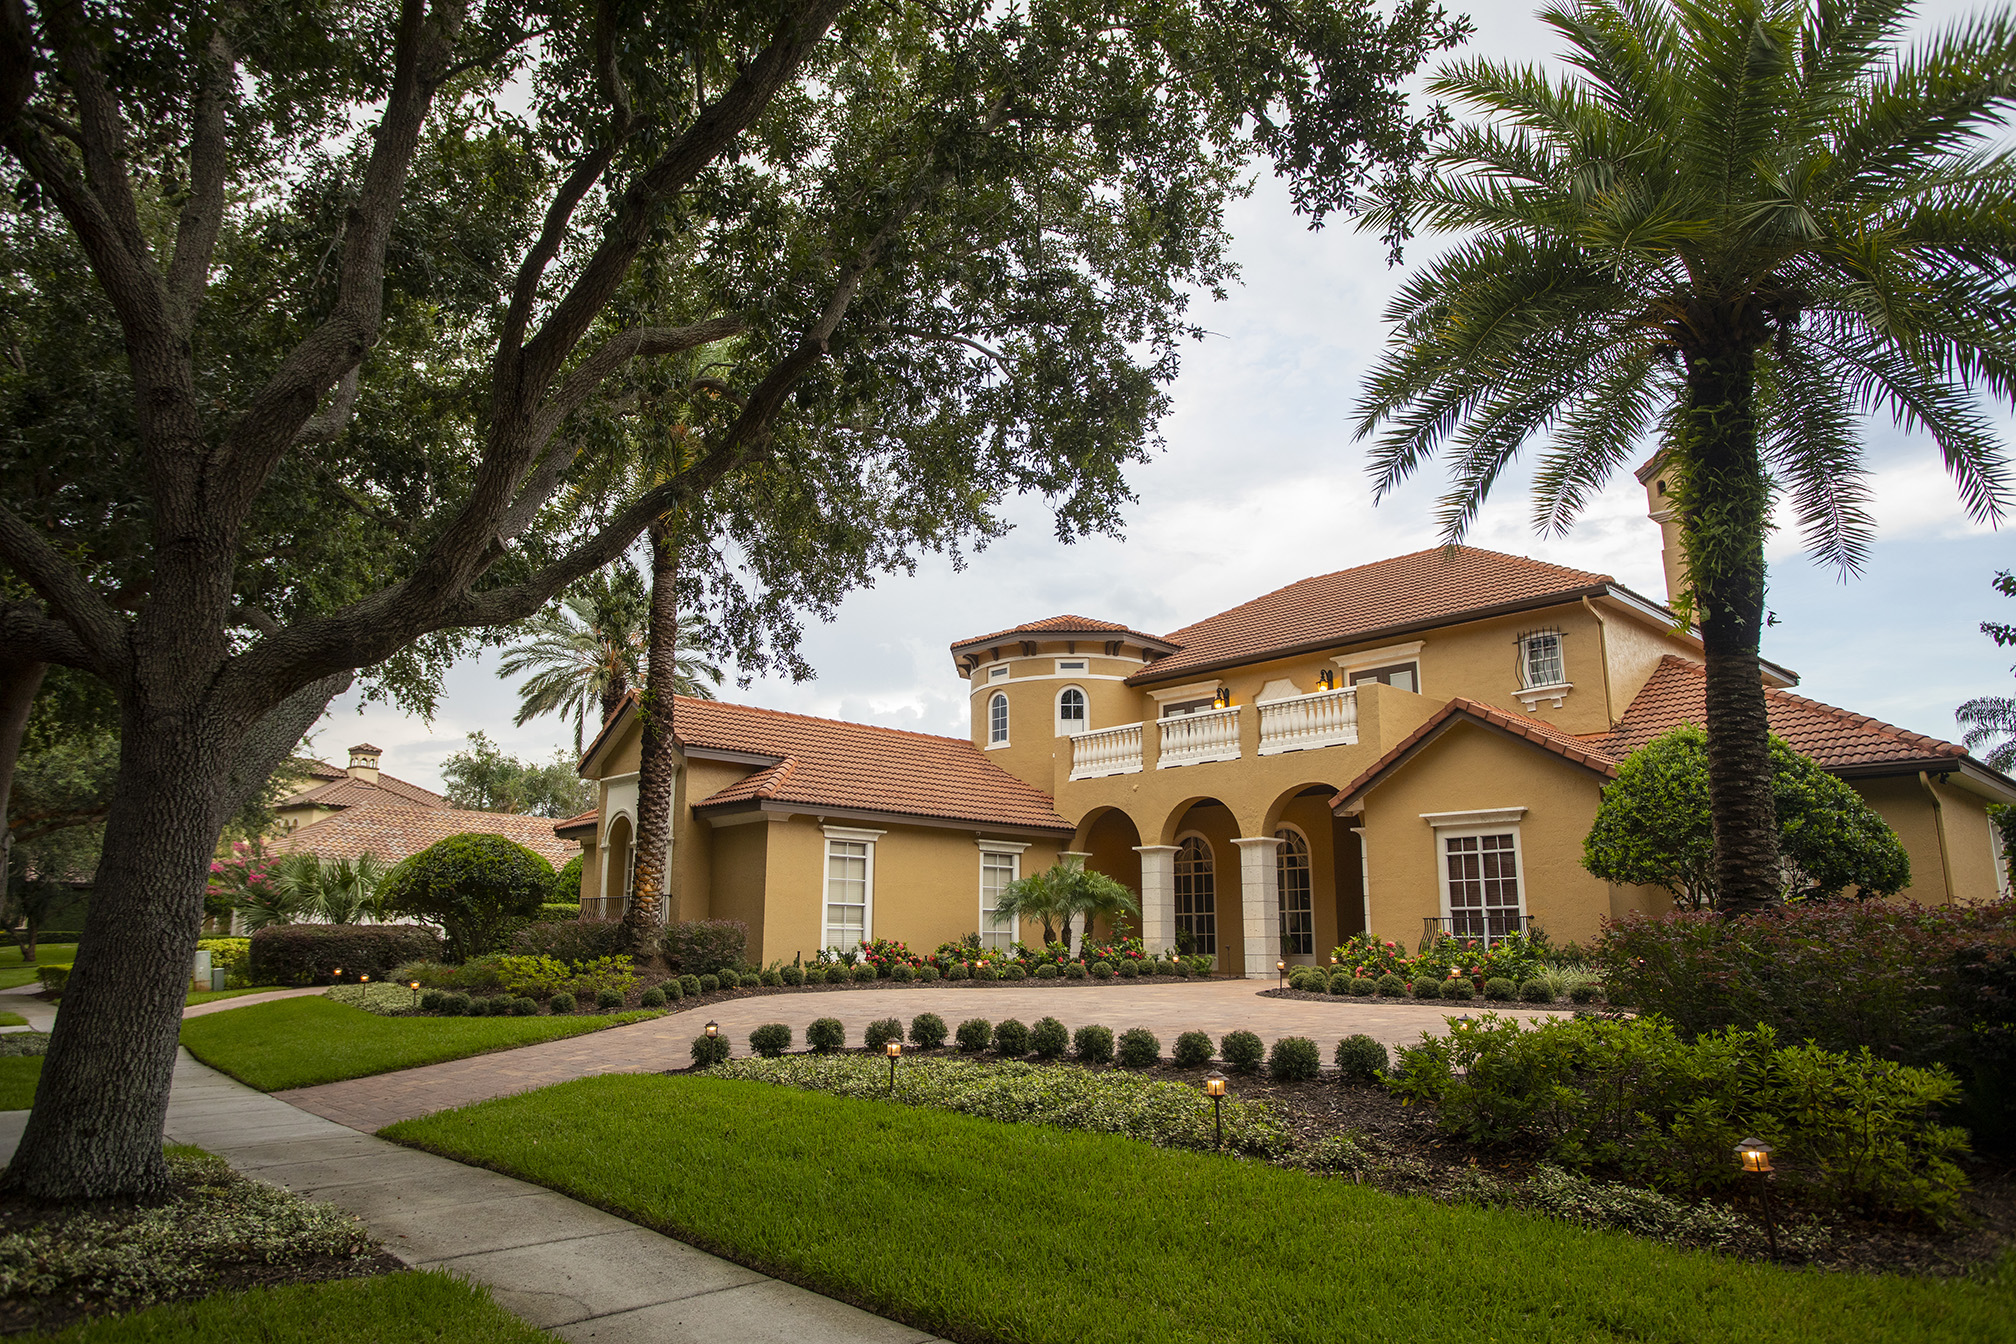 Front landscaping at Florida home